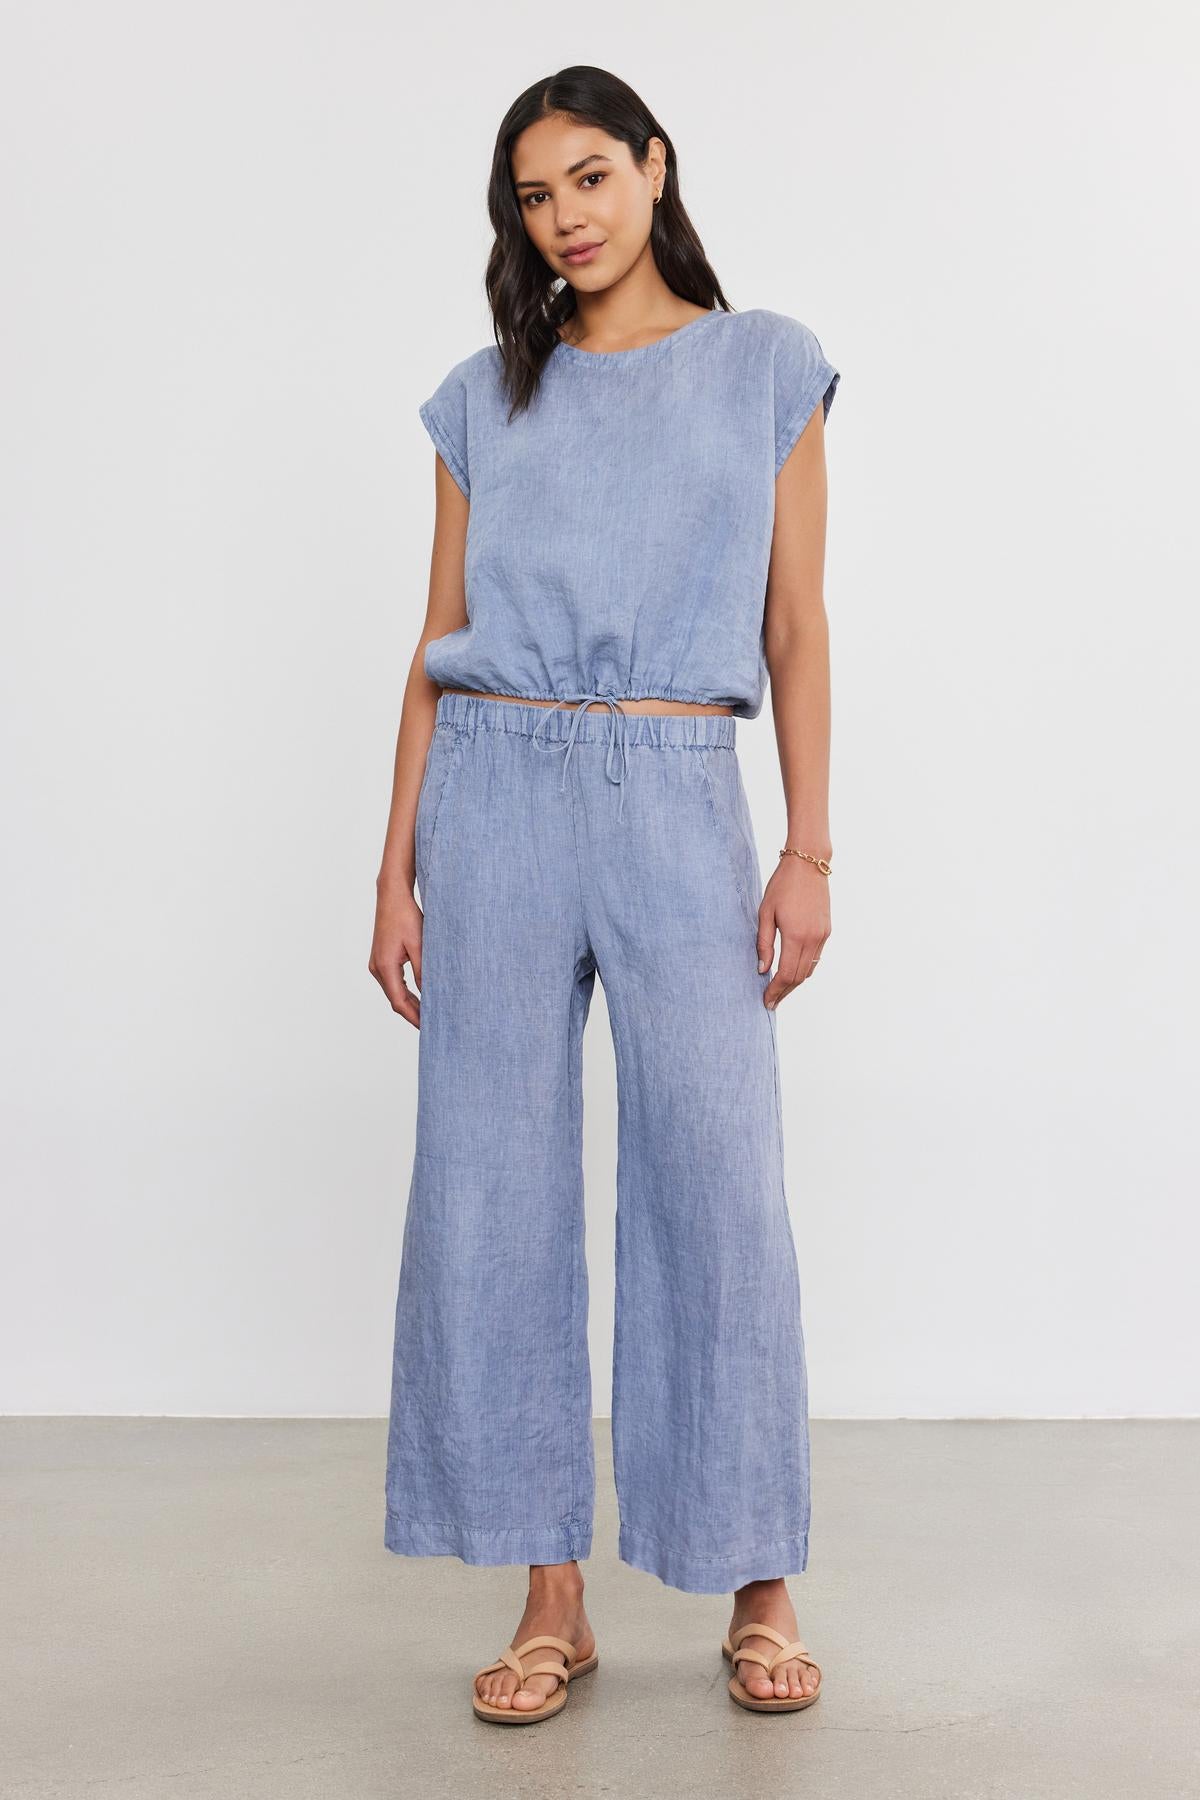 A woman in a blue denim jumpsuit and tan sandals with an ankle crop poses against a plain background.-36910133018817